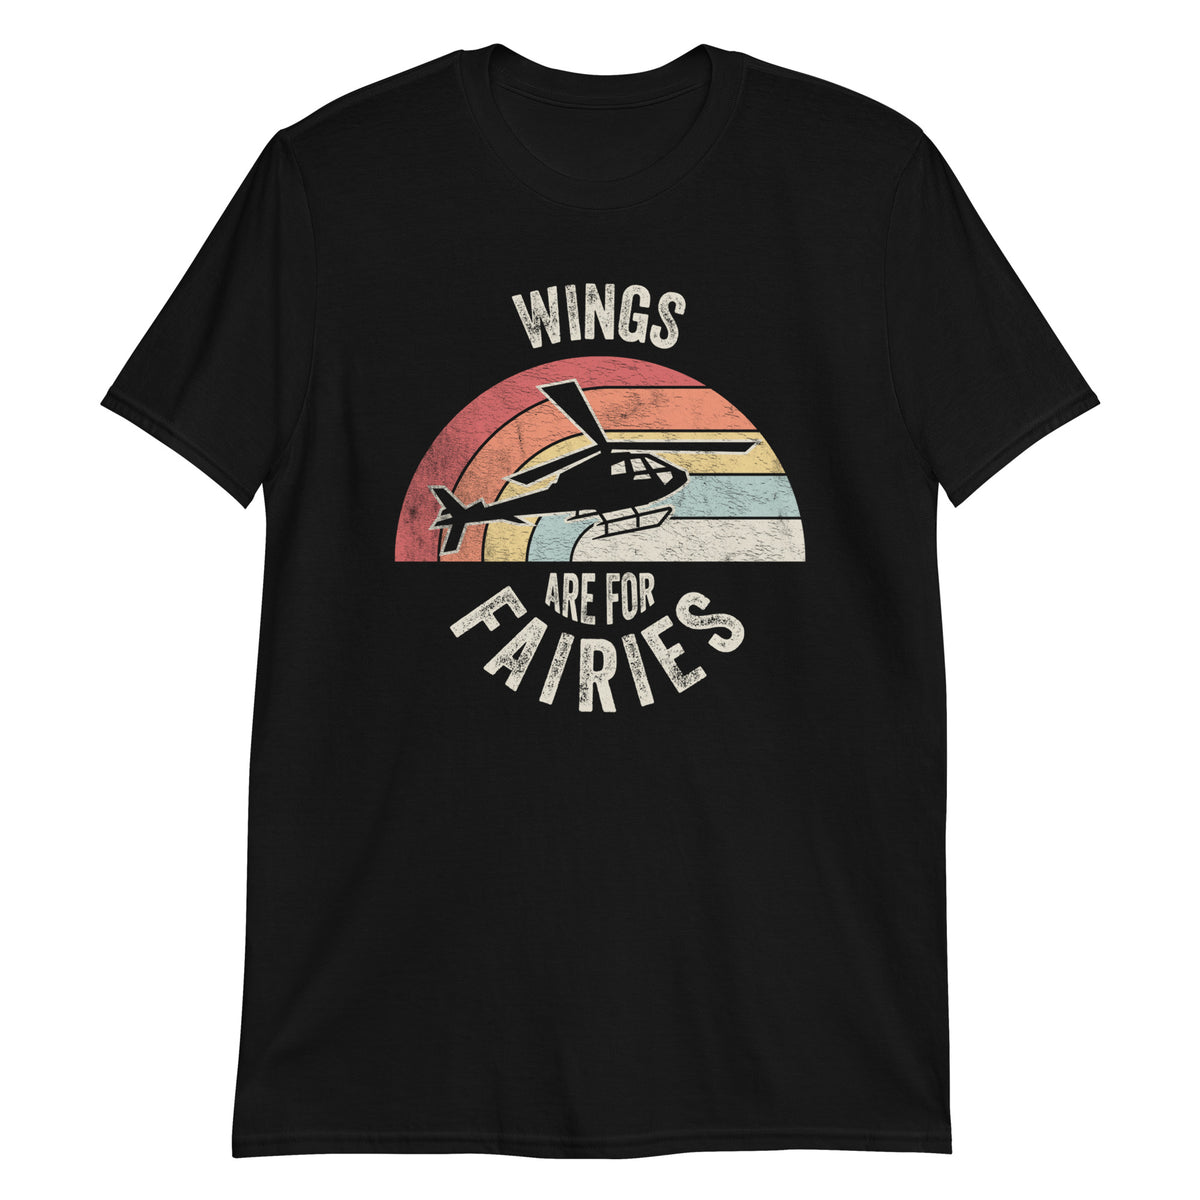 Wings are For Fairies T-Shirt